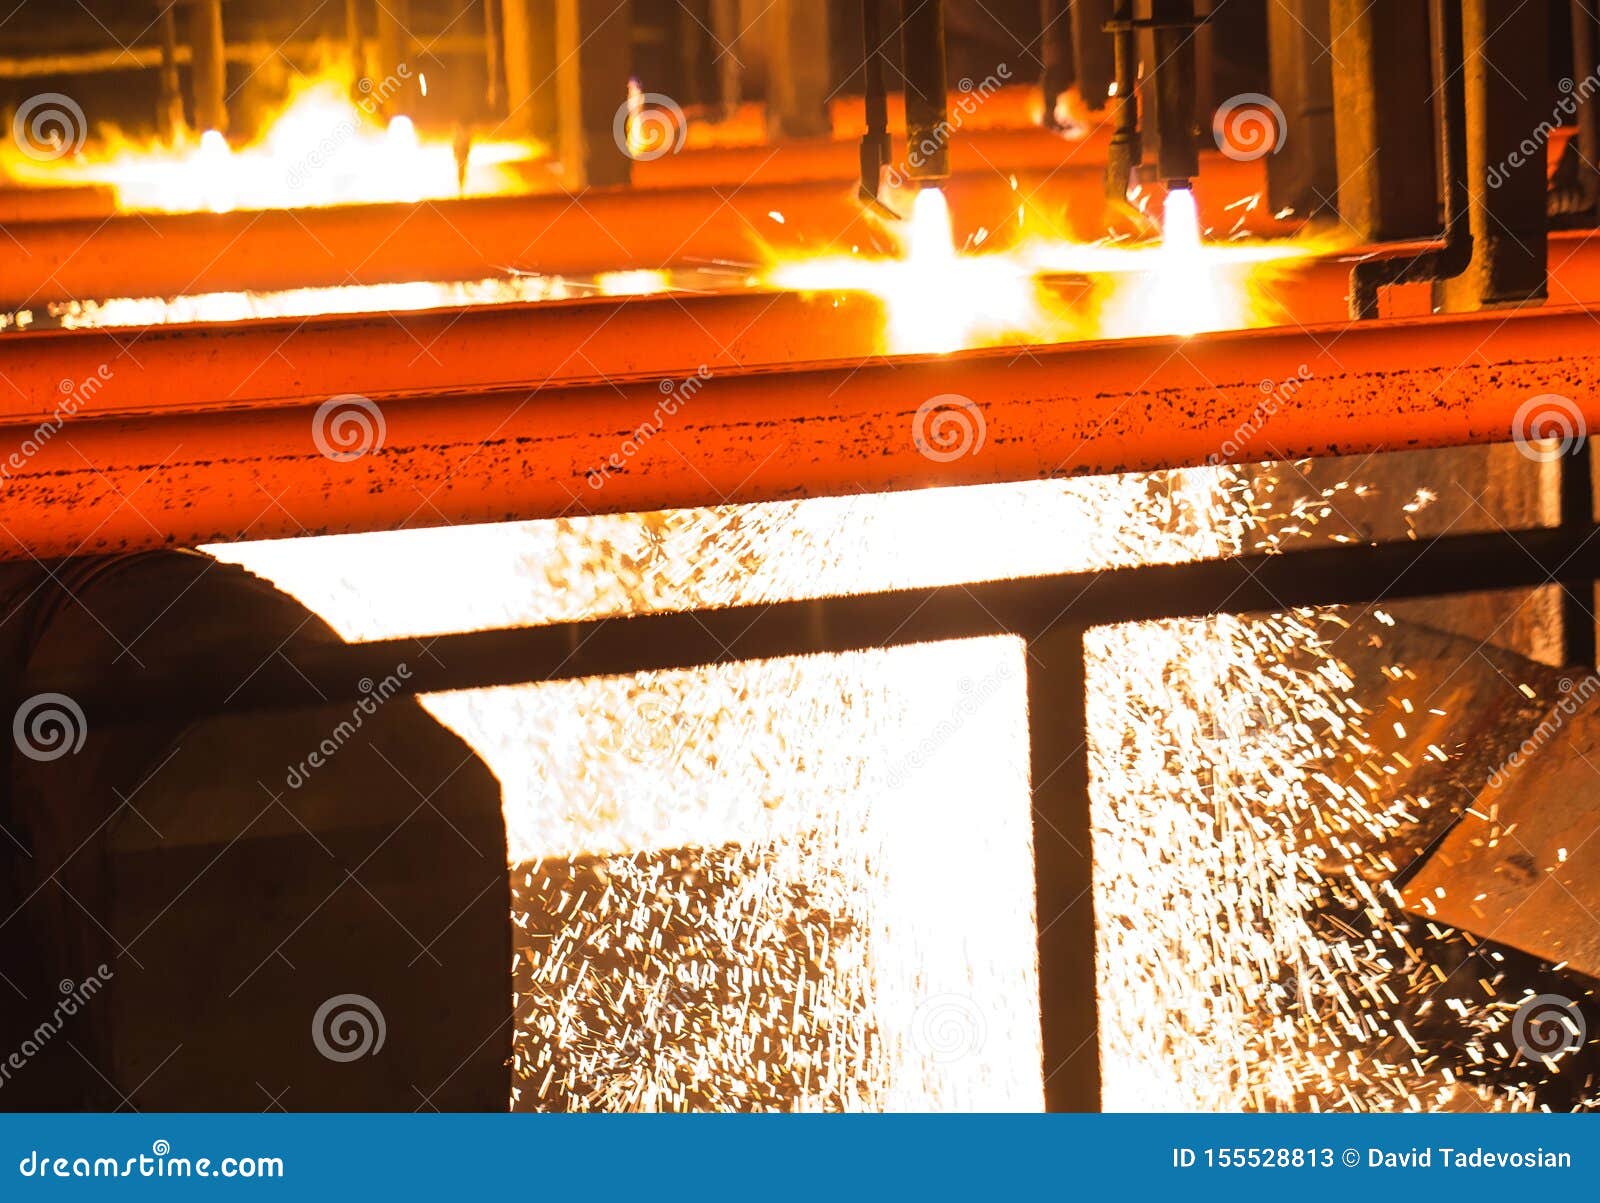 steel billets at torch cutting. hot billet bloom continuous casting, also called strand casting